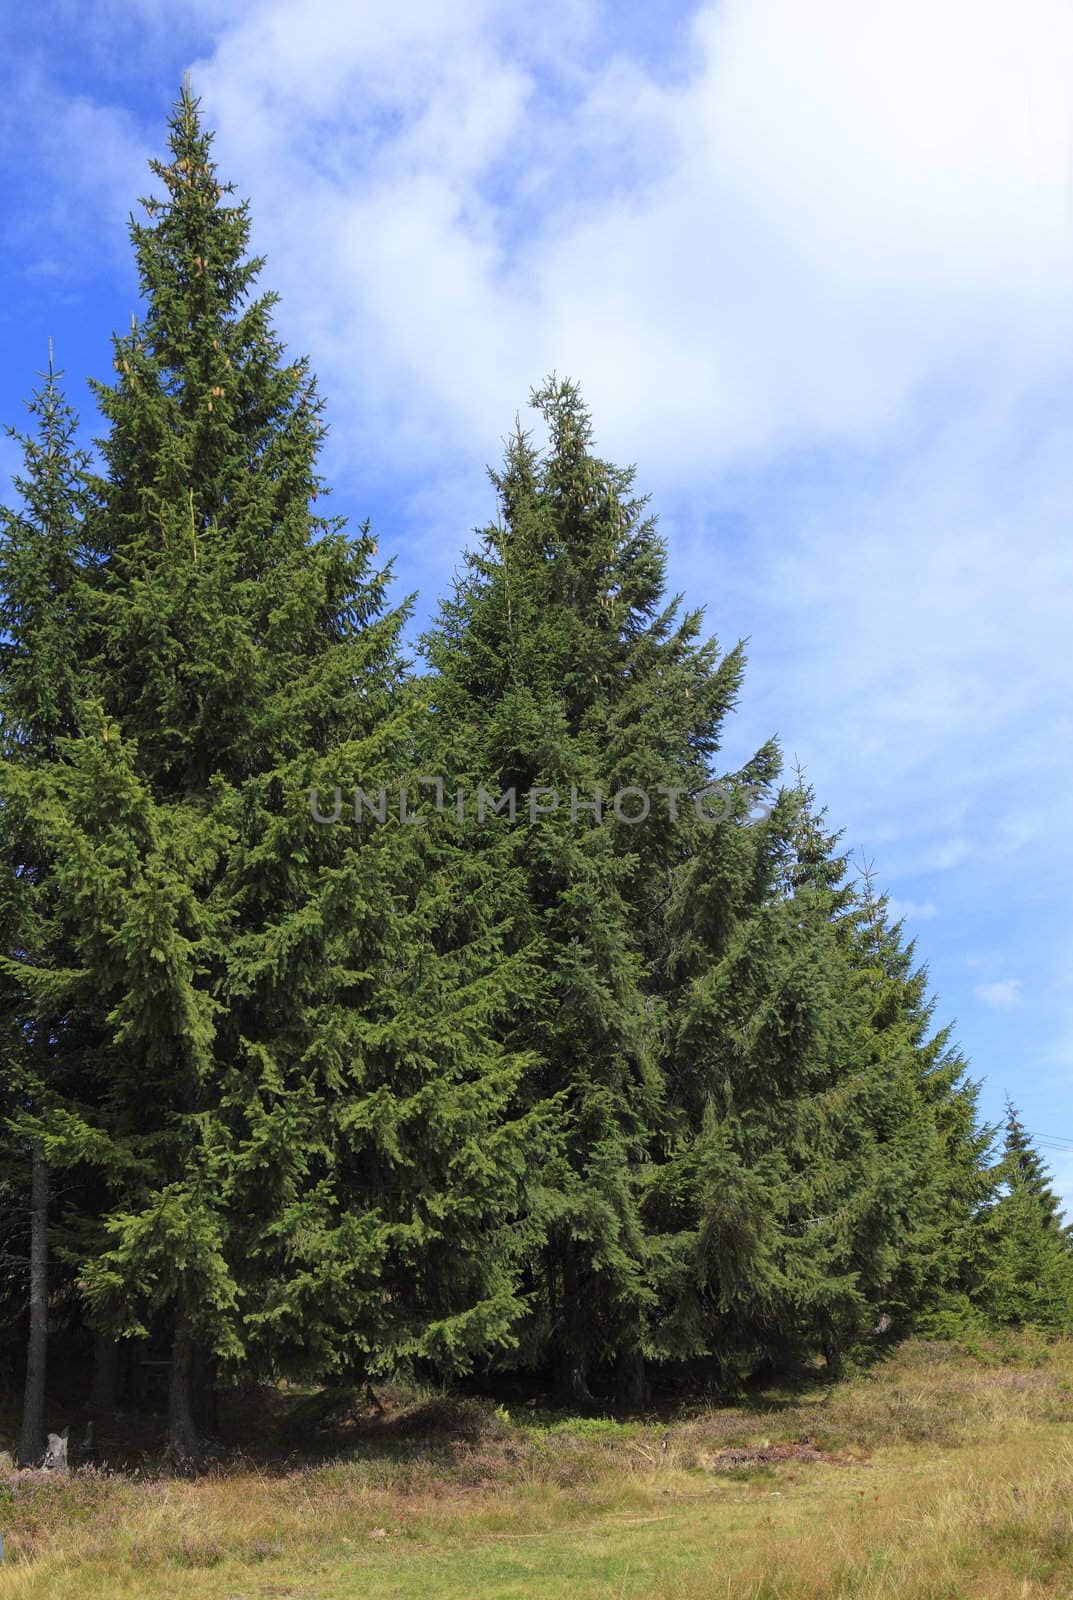 Image of a forest with fir trees and a cloudy sky.